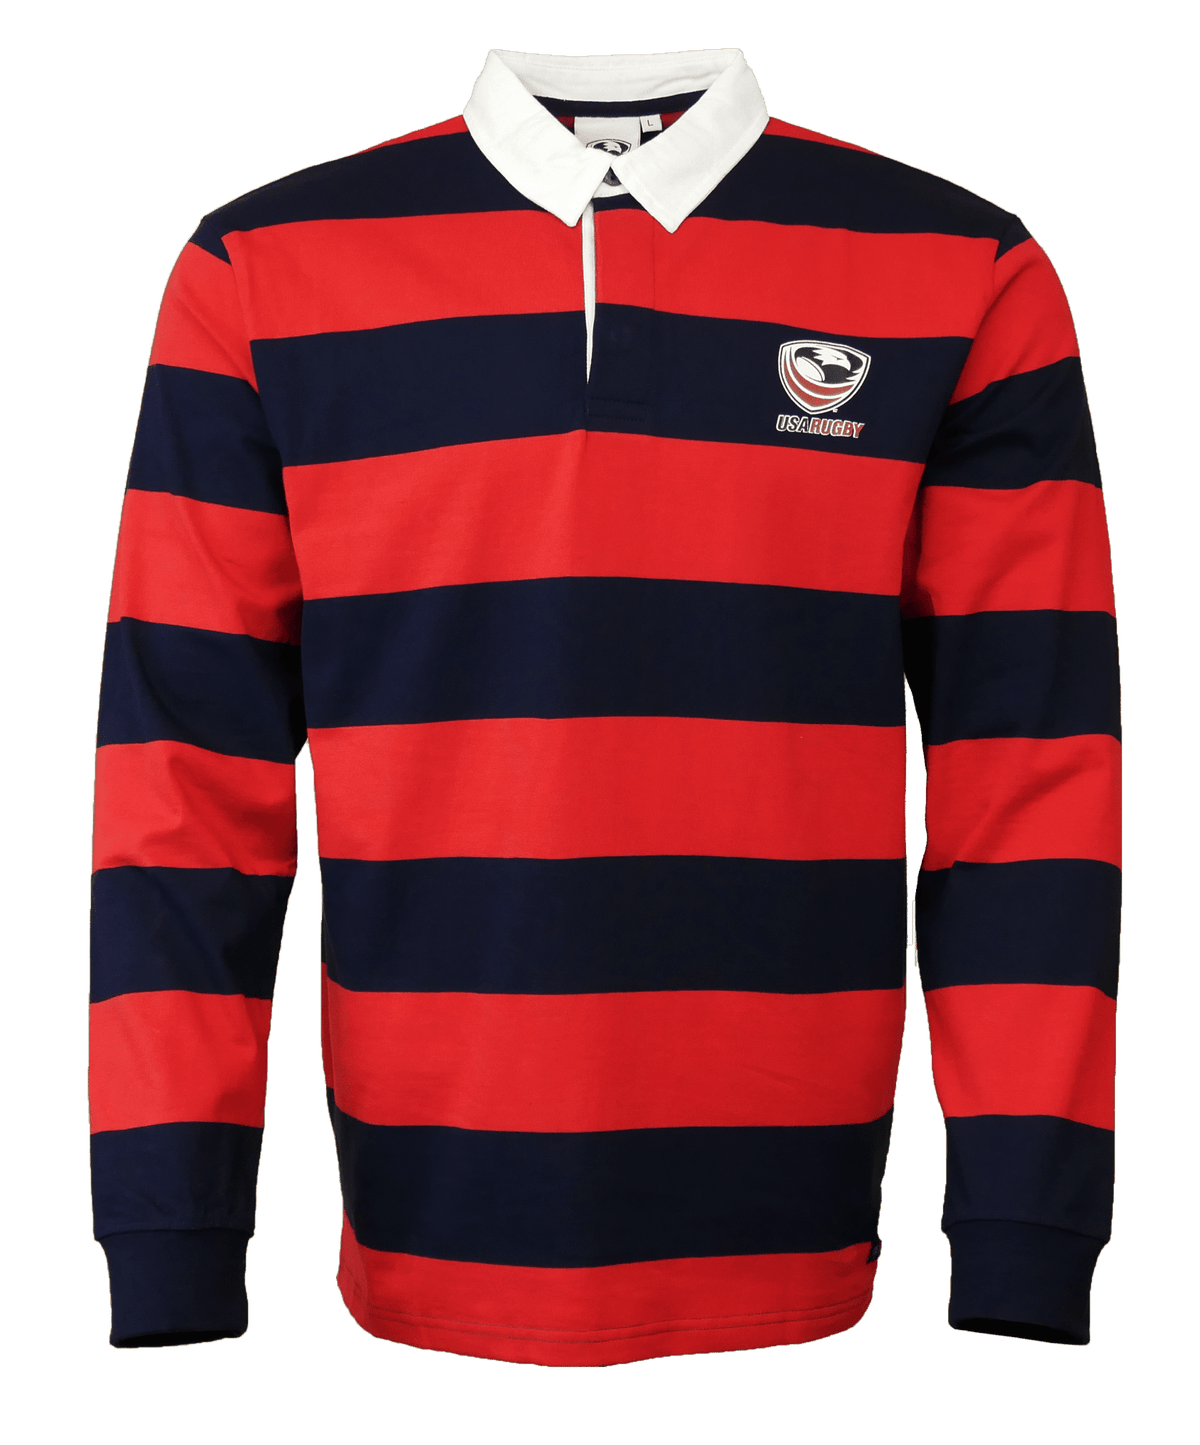 USA Rugby Hooped Classic Jersey - Navy/Red | World Rugby Shop